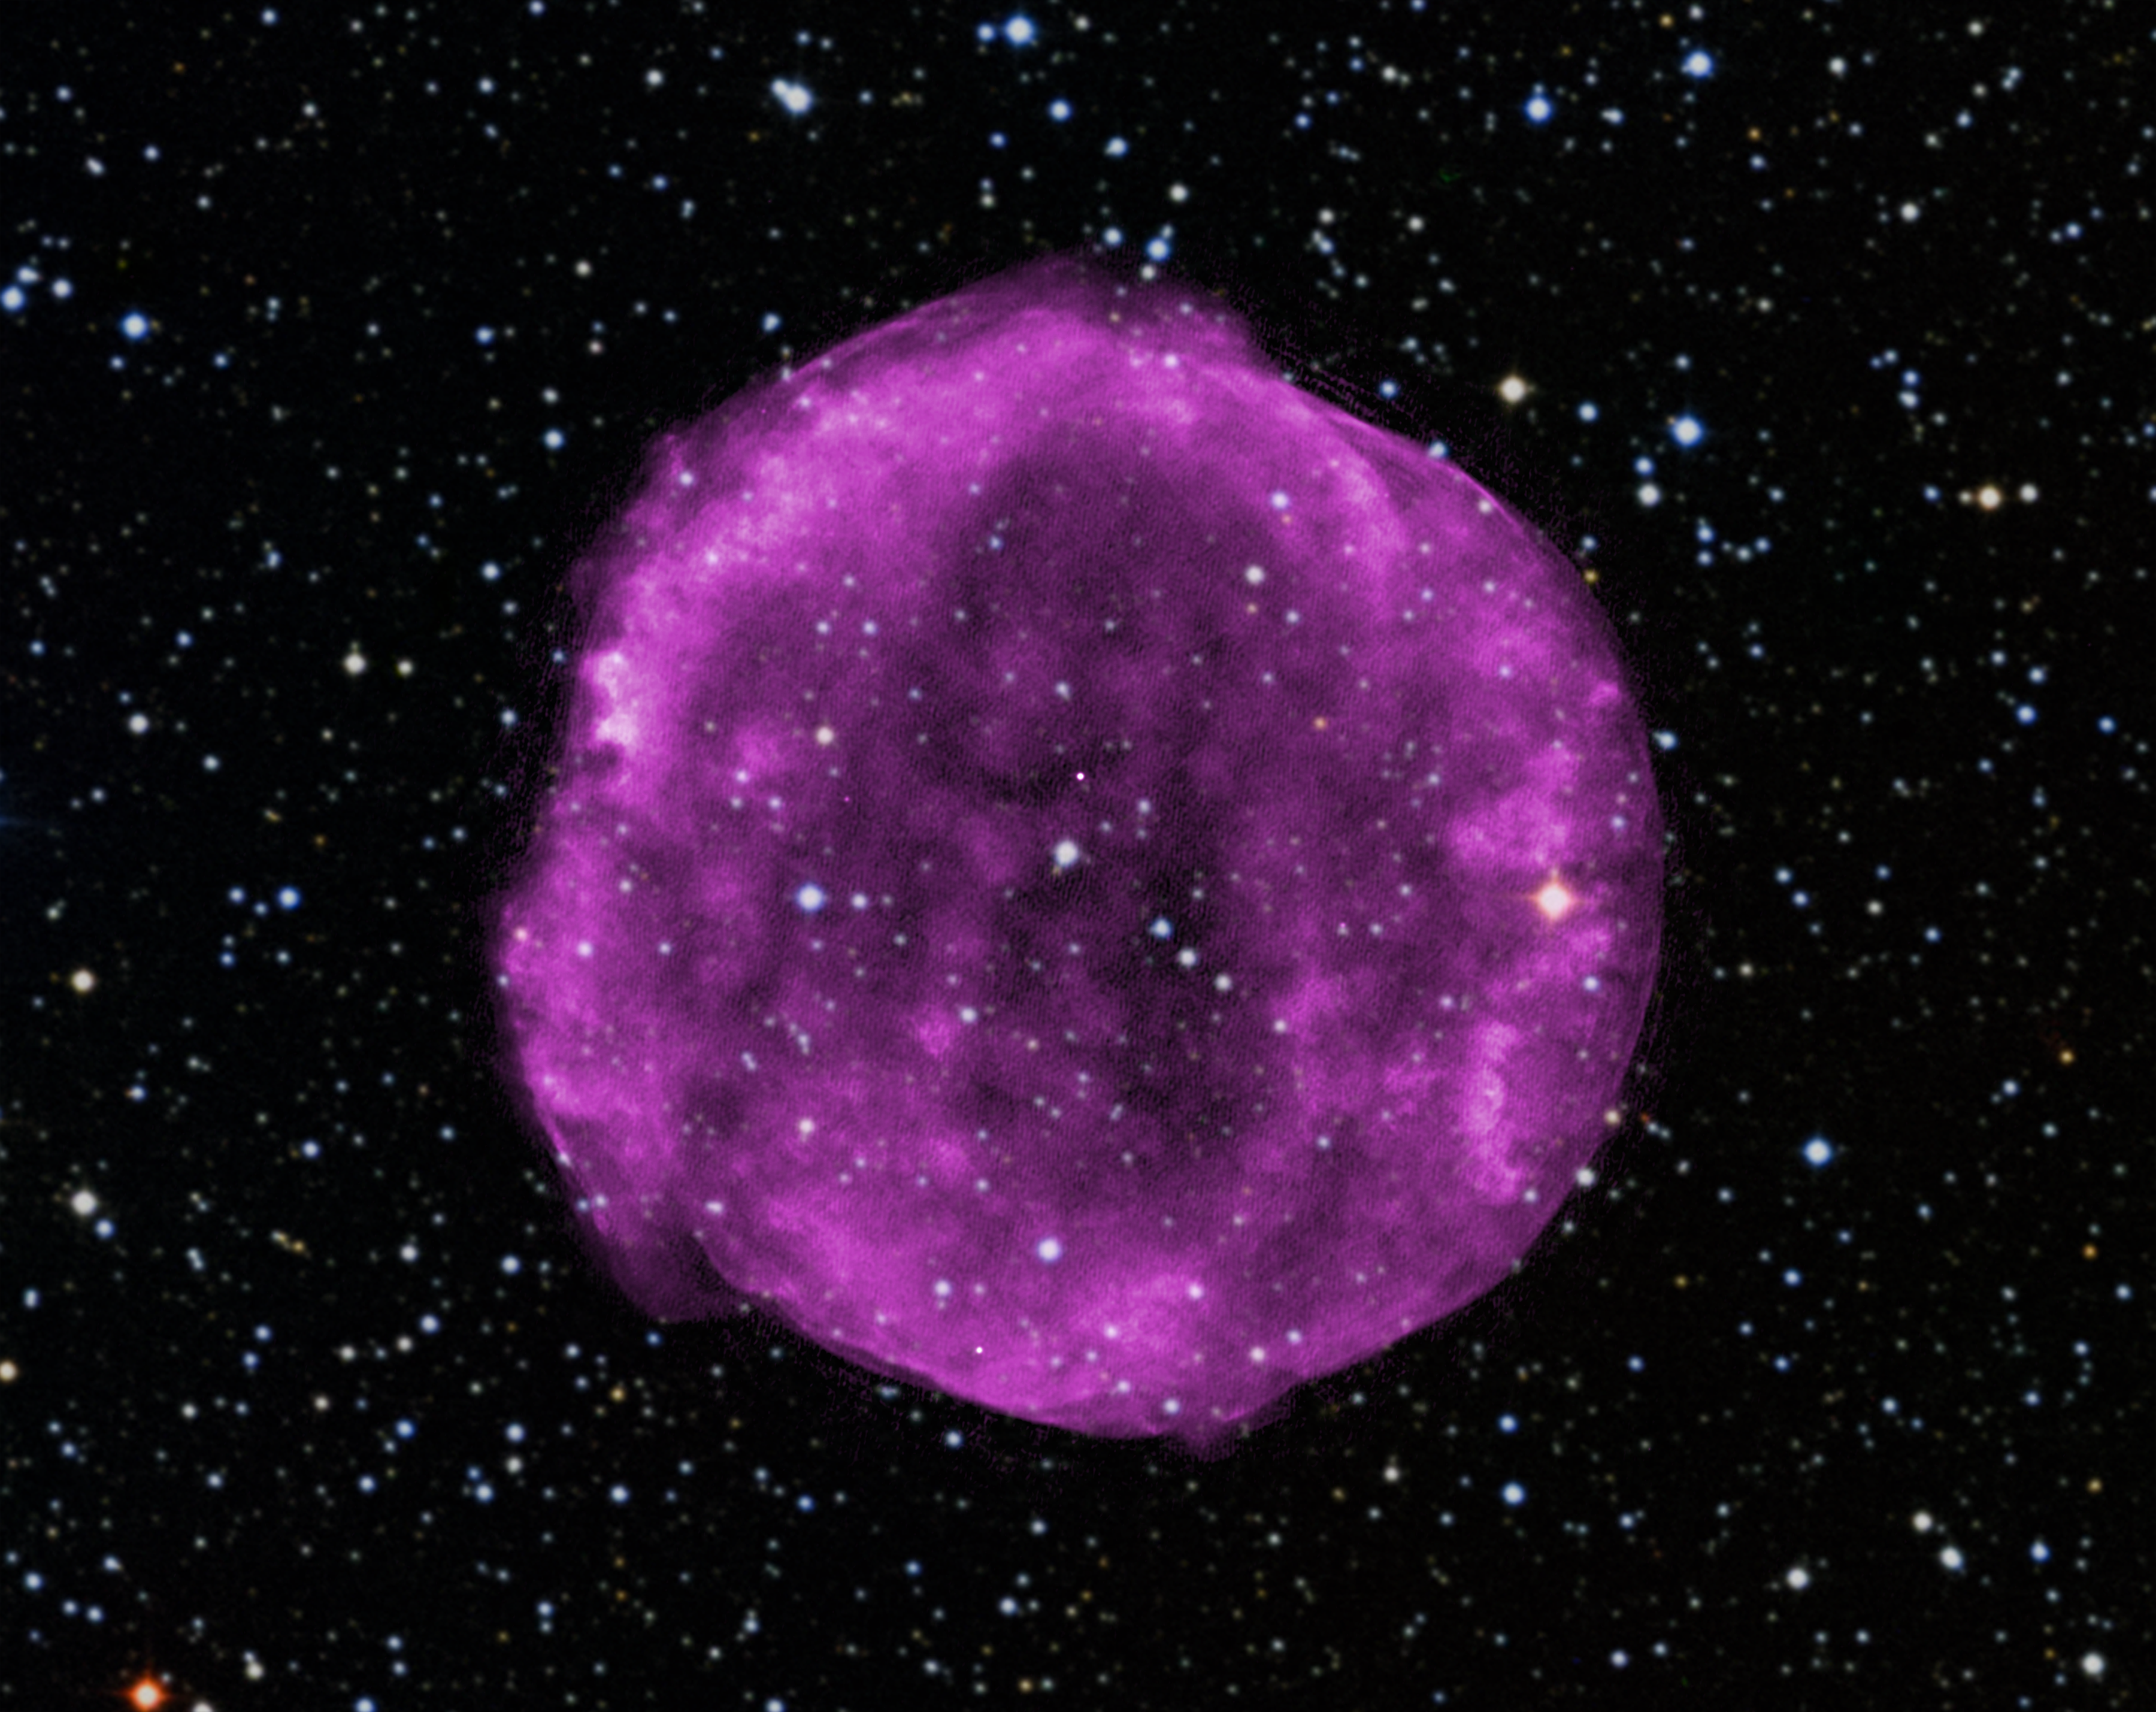 New animations show Supernova 1987As glowing remnants in 